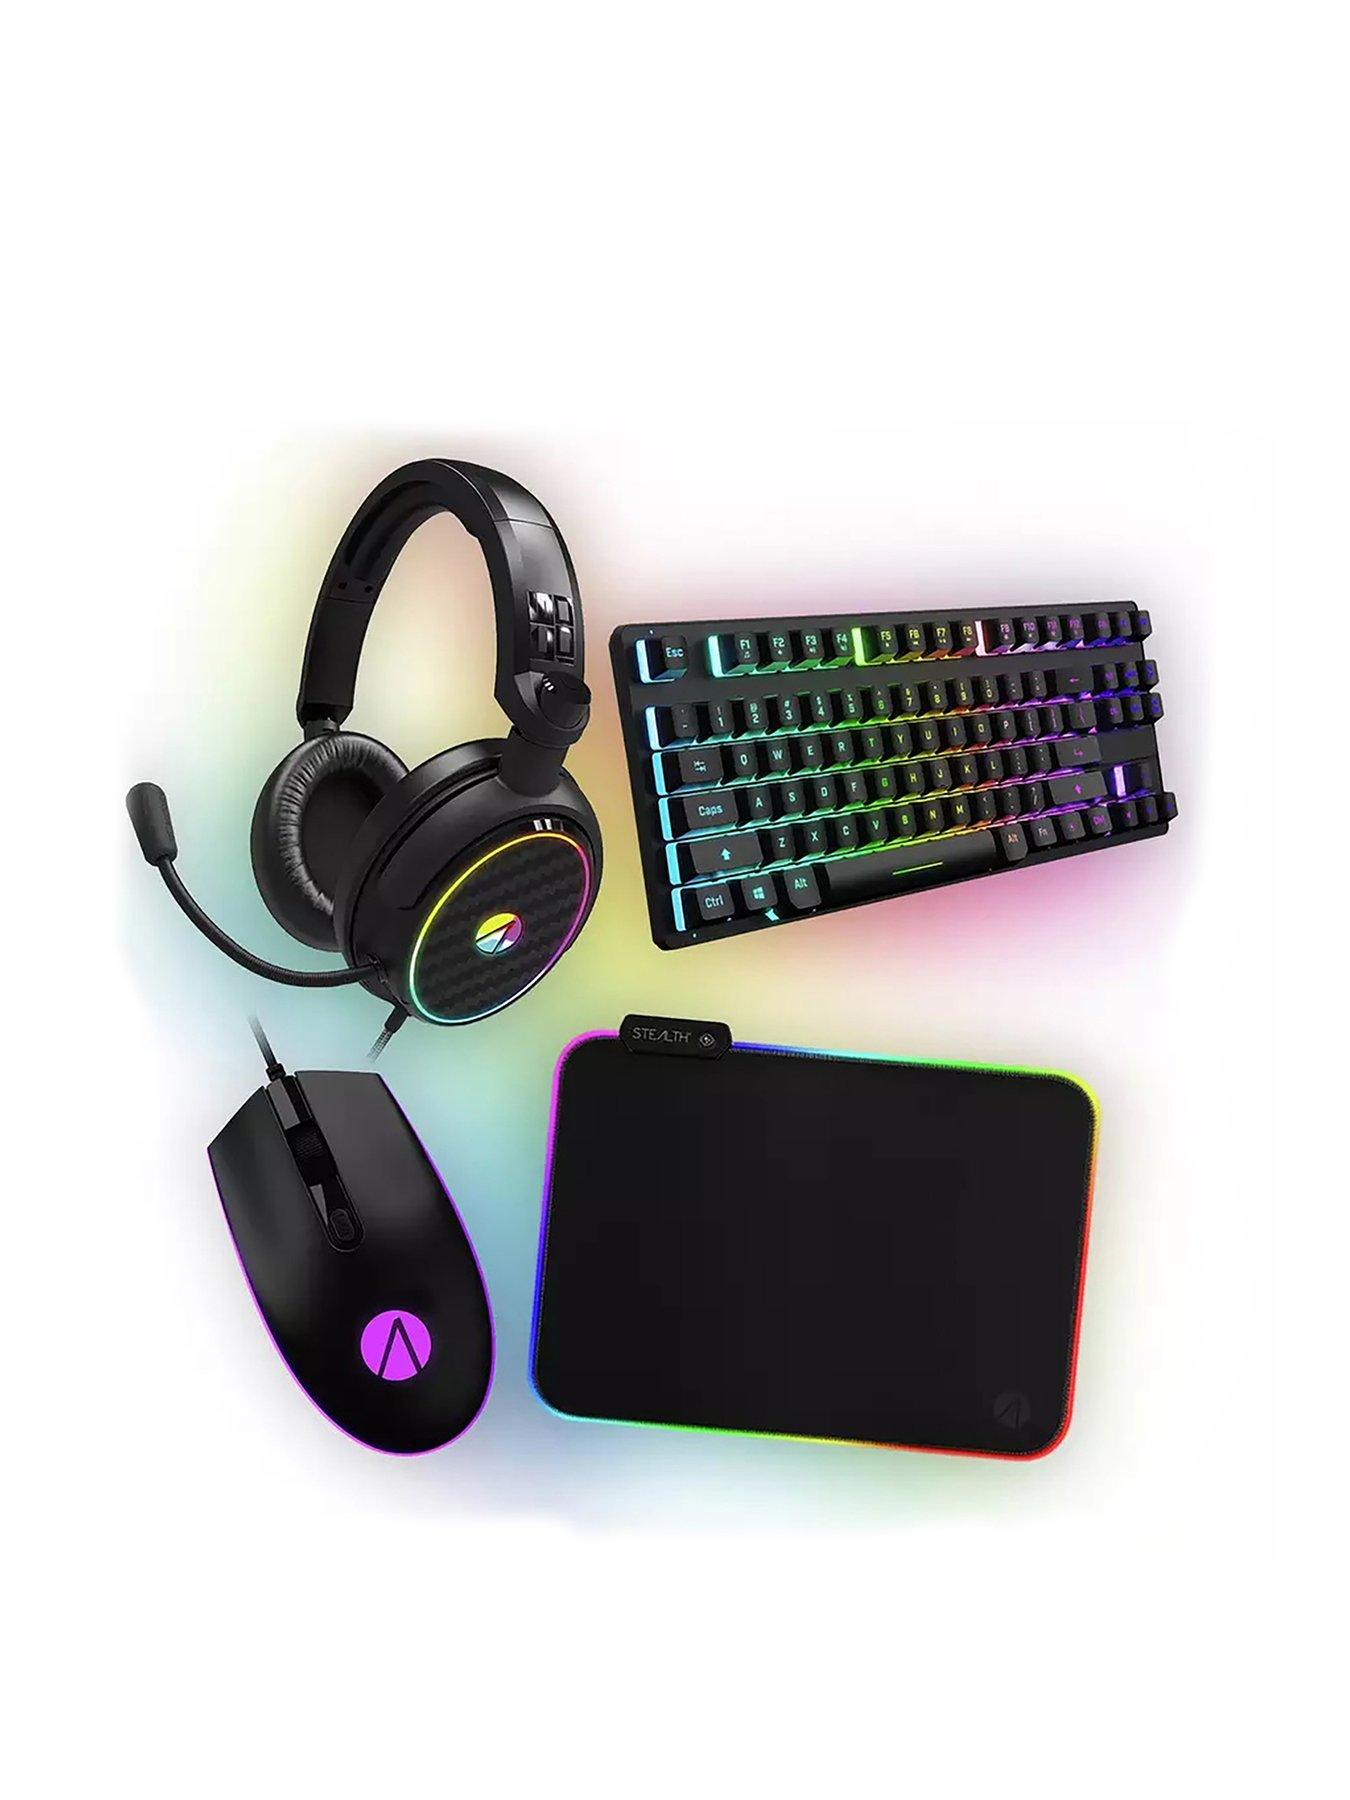 LED Mouse Light Gaming Up Pad, Gaming - Headset Bundle C6-100 Keyboard, Mouse, Stealth 4-in-1